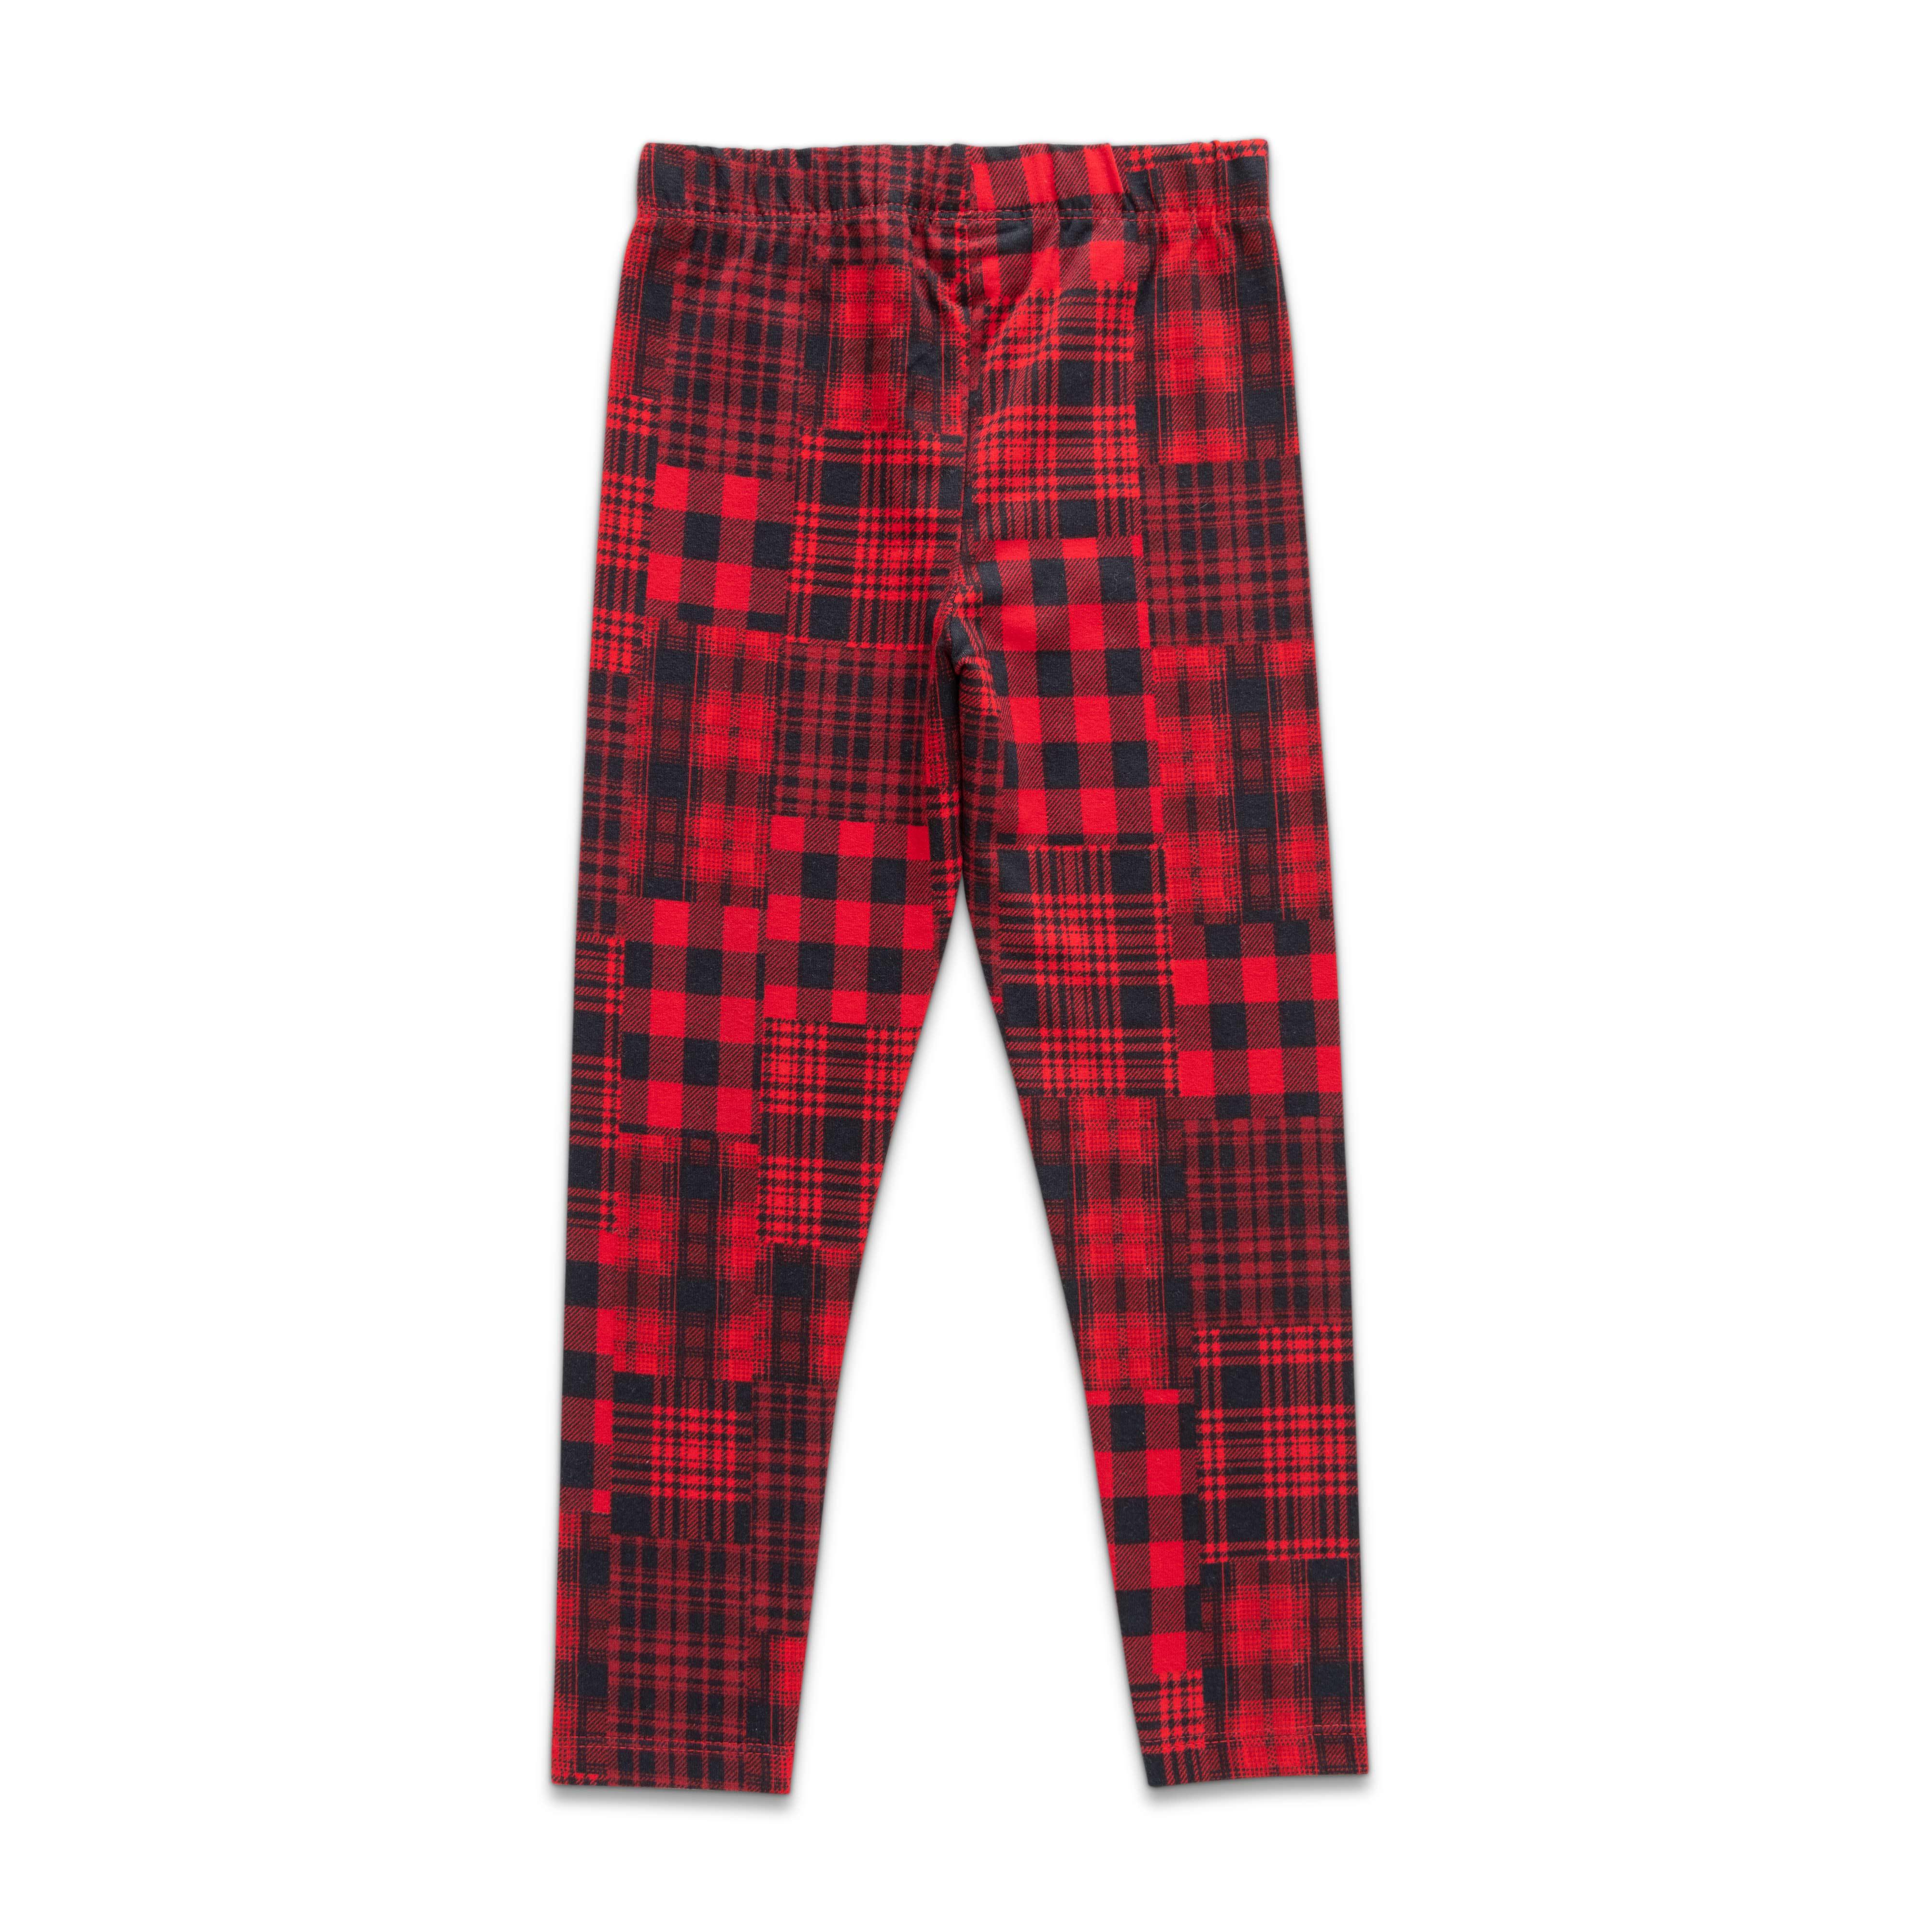 Girls Toddlers Checked Leggings Black & Red - Juscubs